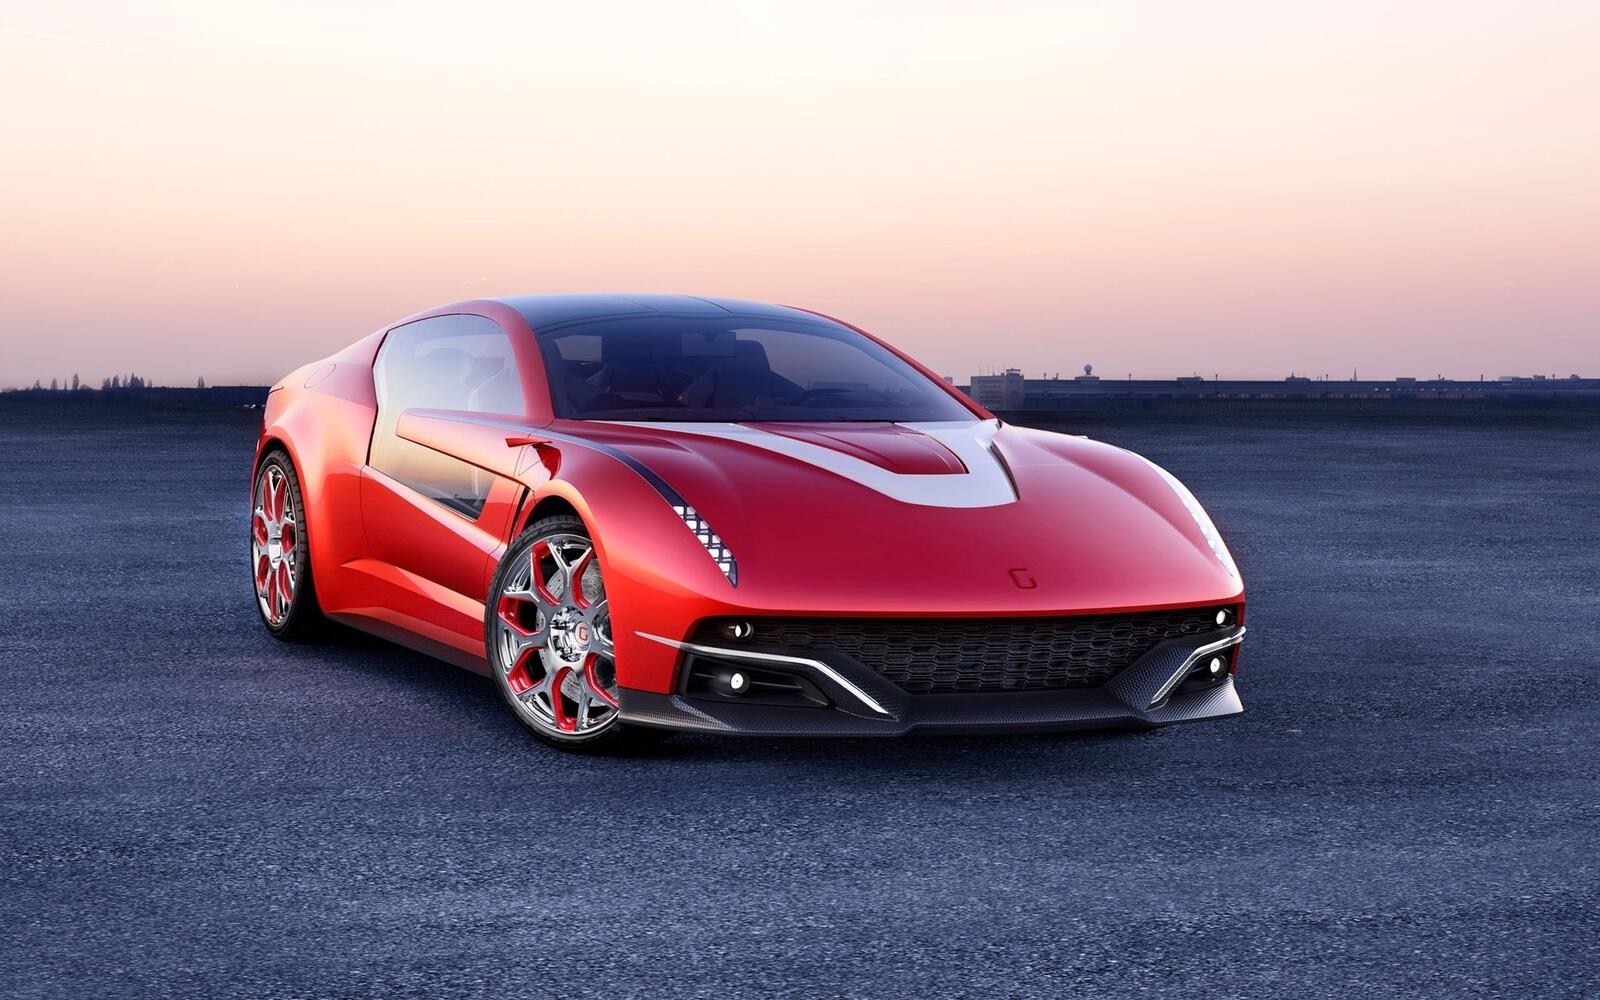 Wallpapers Giugiaro Brivido the car of the future cars on the desktop